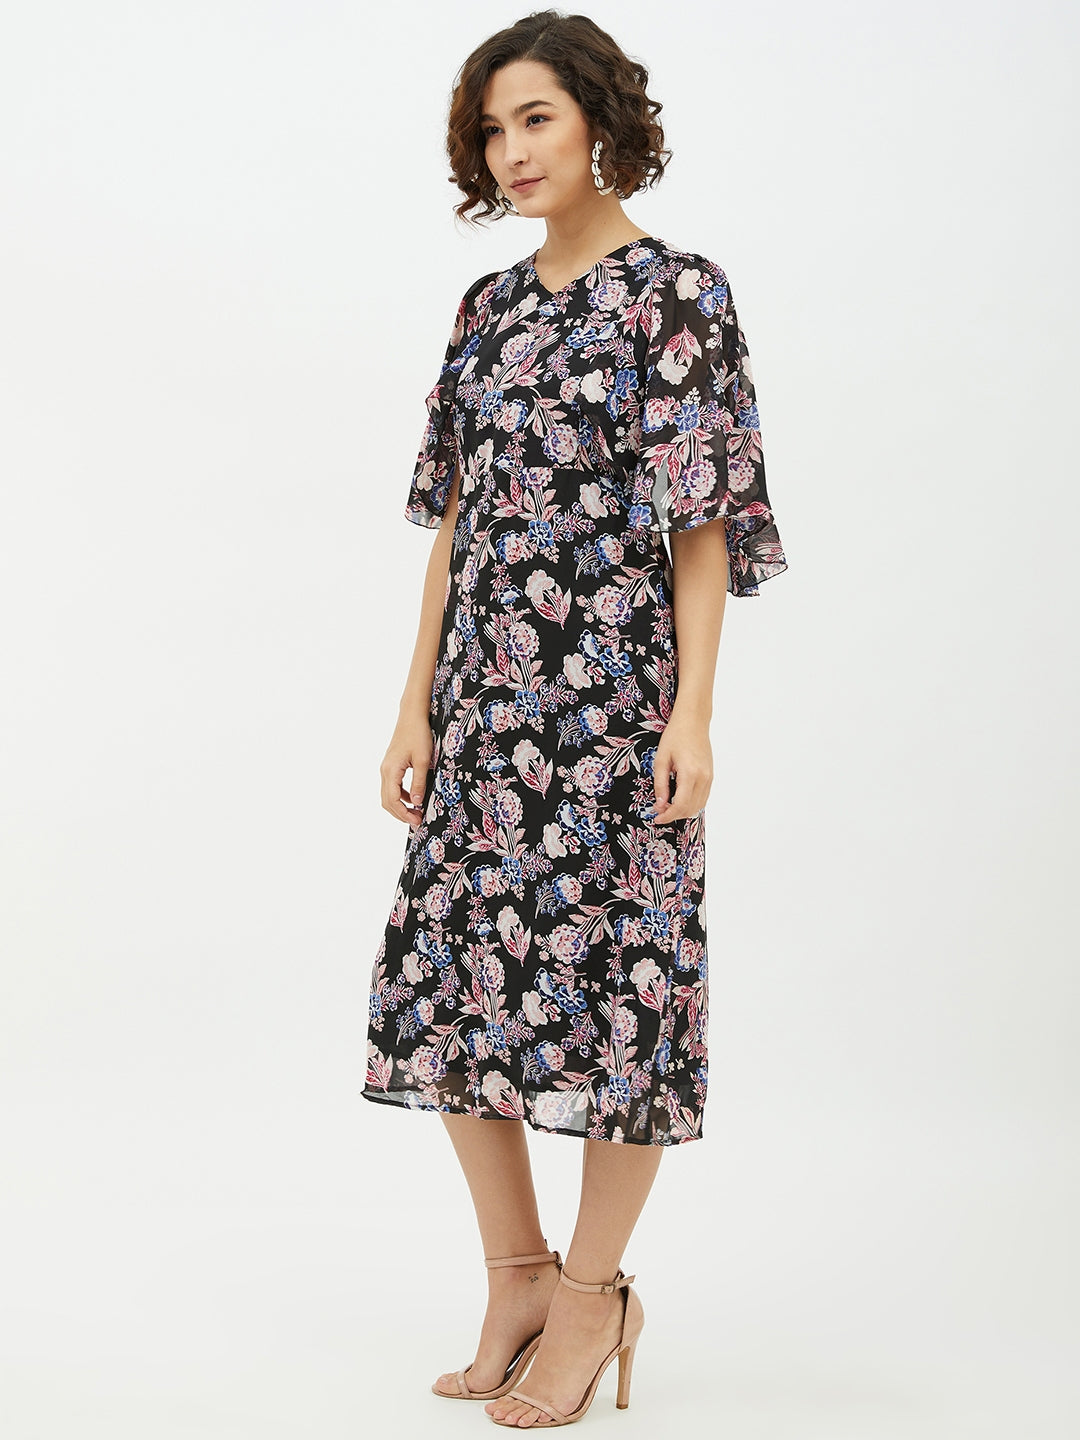 Women's Polyester Georgette Floral Print Cape style Dress - StyleStone